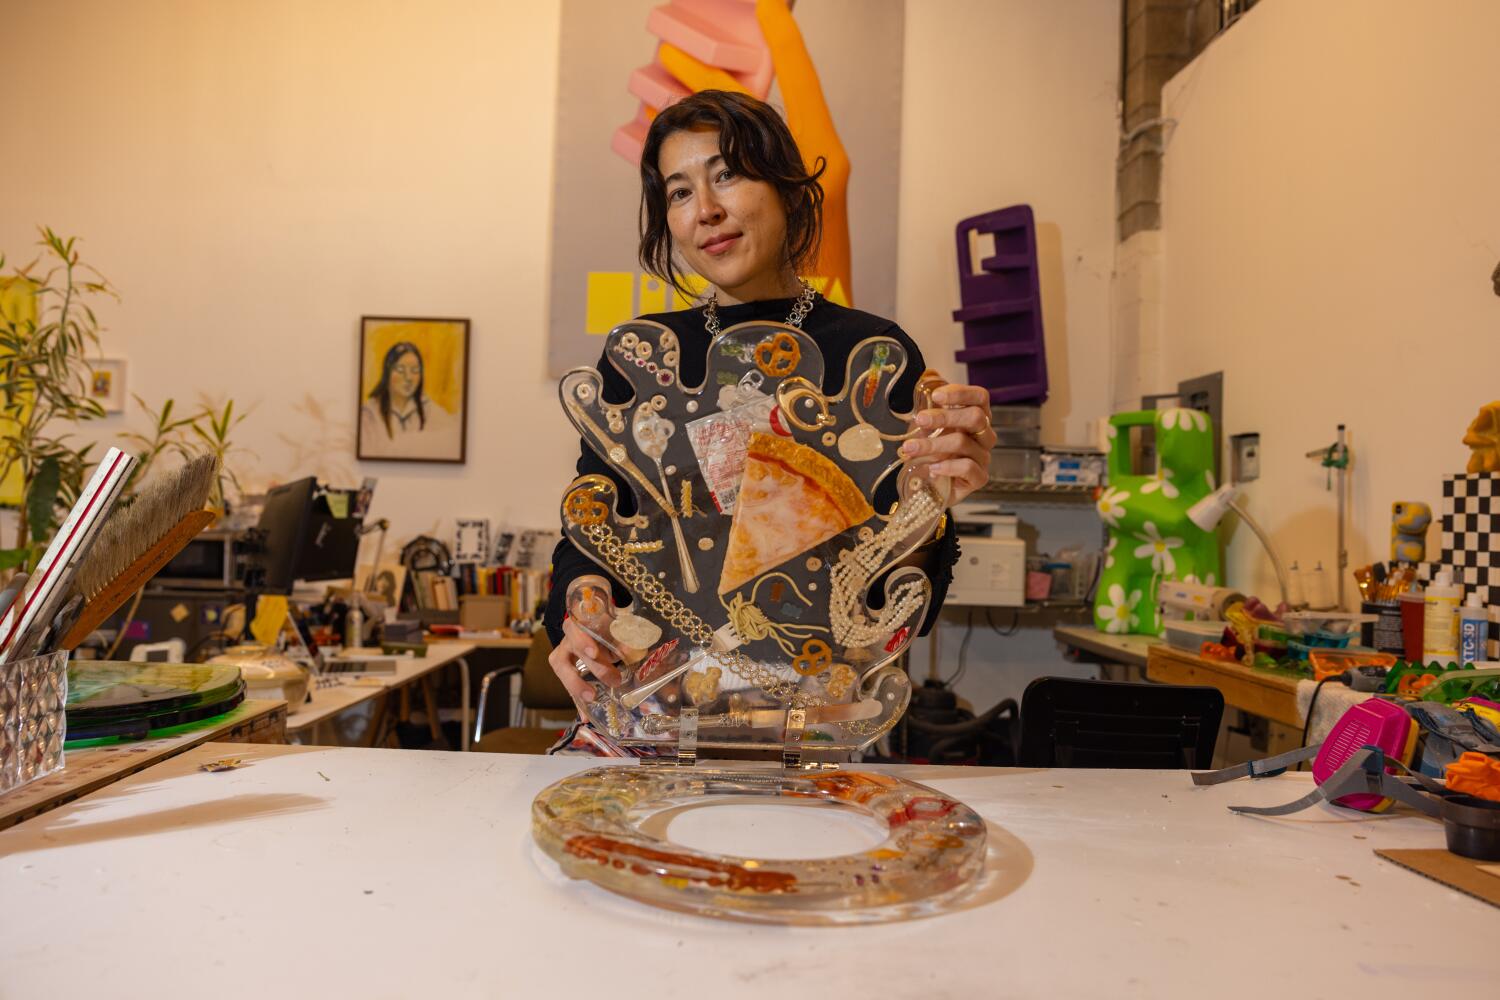 Your toilet seat doesn't have to look boring. Bailey Hikawa's designing ones with pizza slices and pearl necklaces